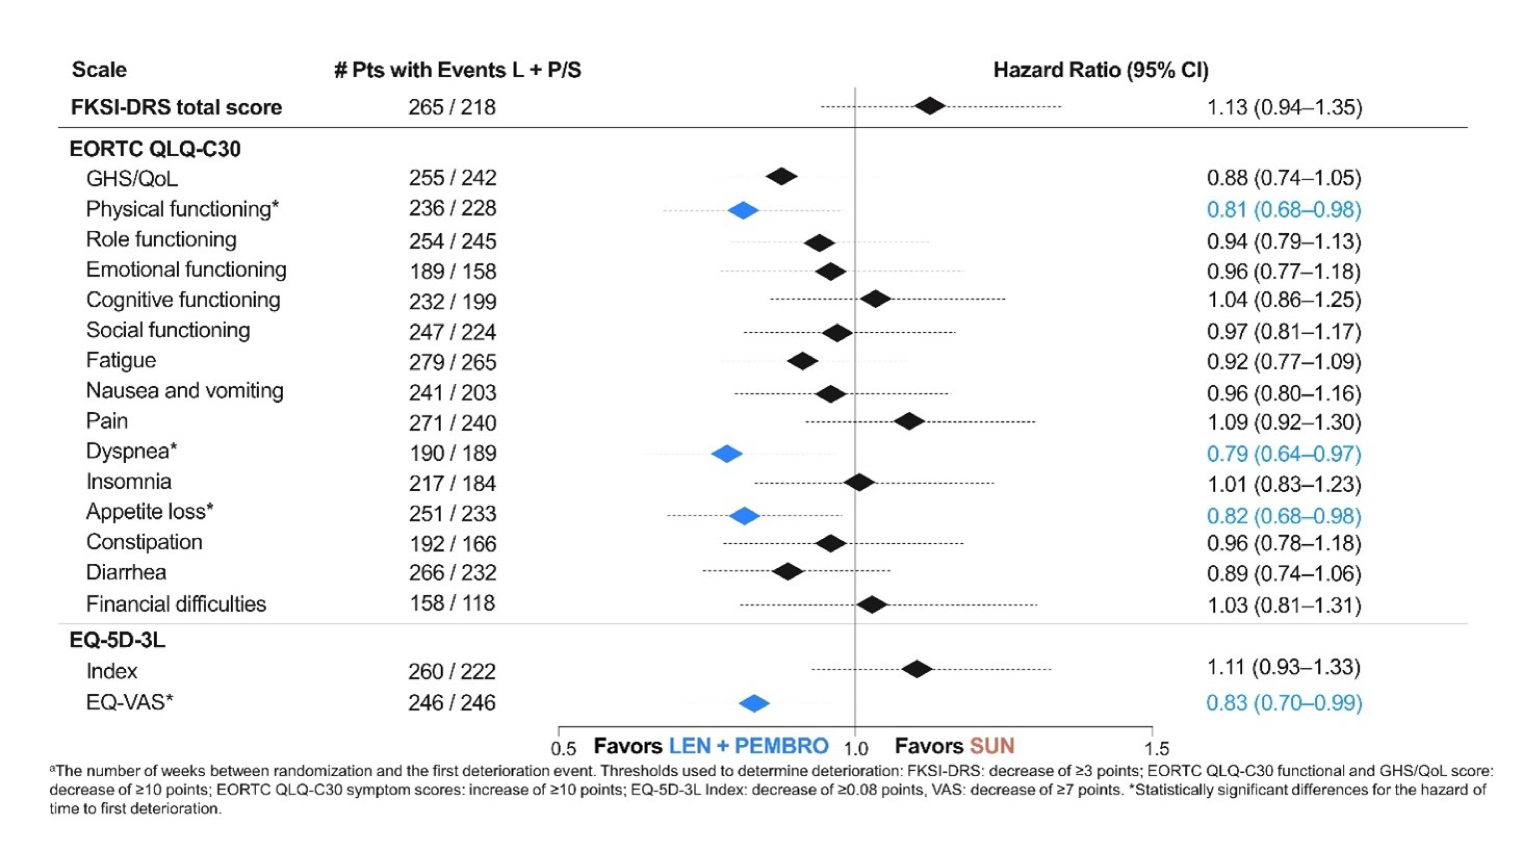 Forest plot of time to first deterioration estimates obtained with their corresponding 95% confidence intervals for different questionnaires administered to patients in the CLEAR trial (FKSI-DRS total score, the EORTC QLQ-C30, and the EQ-5D-3L) administered to patients receiving lenvatinib plus pembrolizumab and sunitinib in the CLEAR trial. Estimates with their confidence intervals obtained in the HRQoL scales that fall entirely to the left of the line favour the lenvatinib plus pembrolizumab treatment and those that fall entirely to the right of the line favour sunitinib.